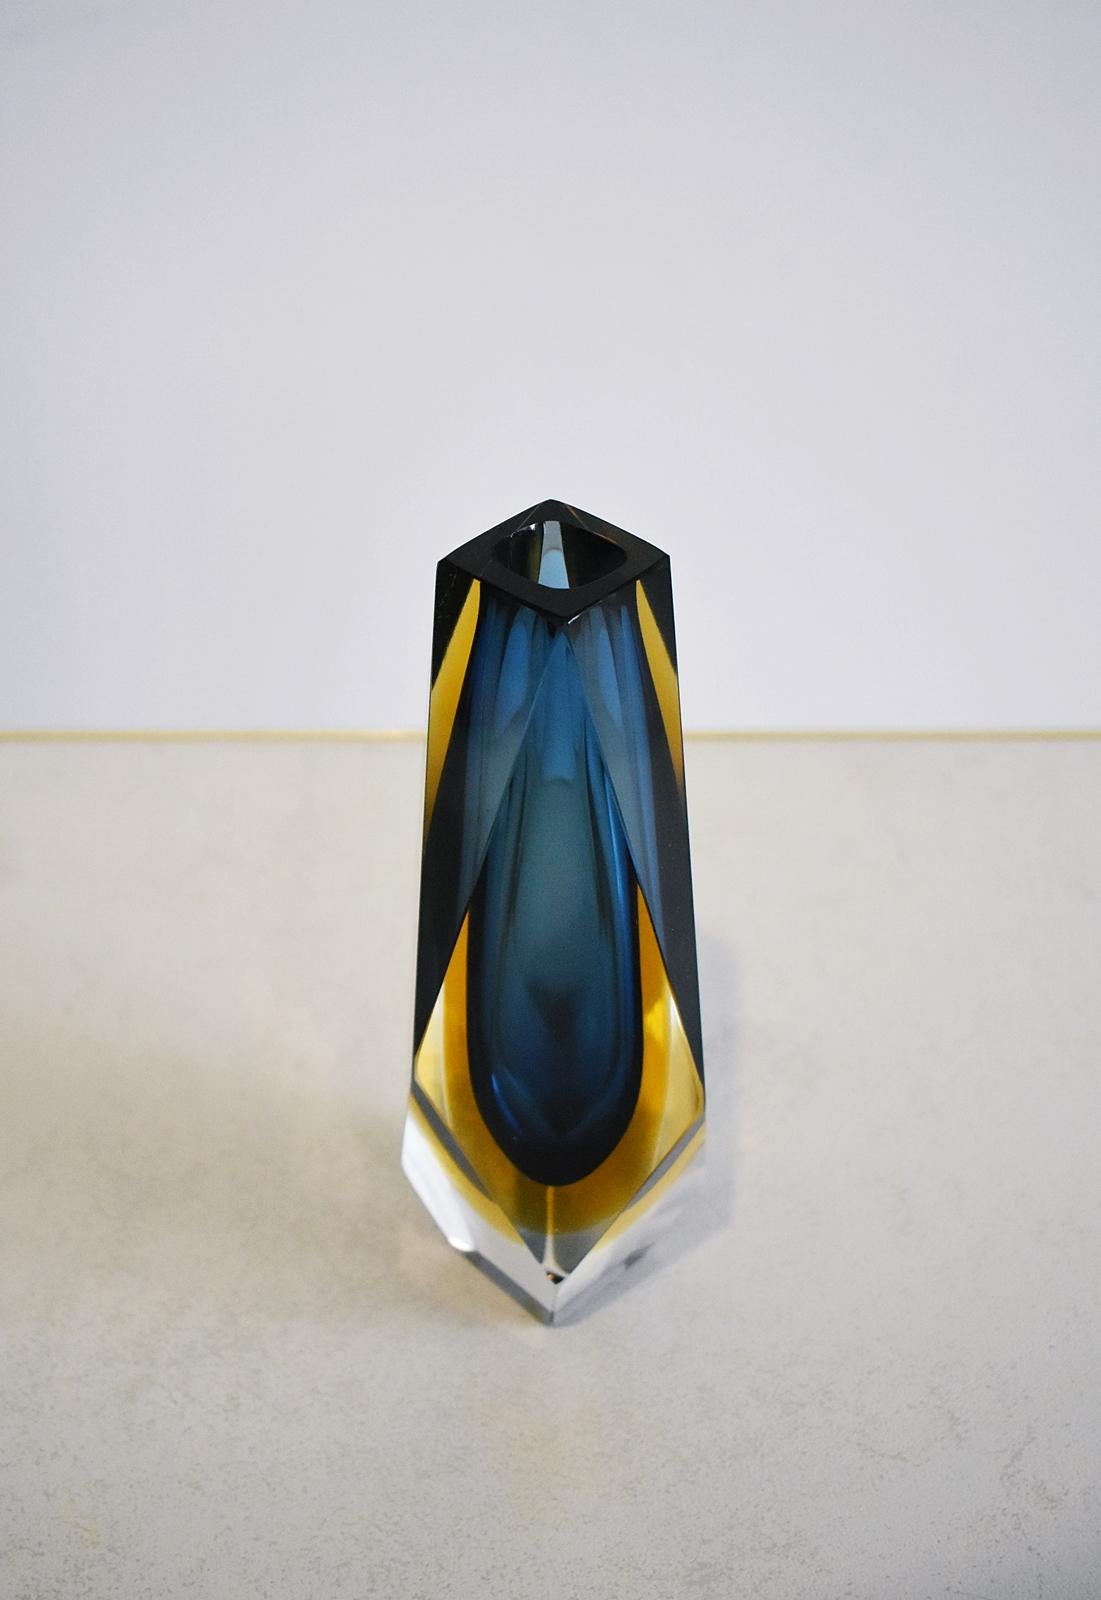 Italian Midcentury Faceted Murano Glass Strong Blue and Yellow Sommerso Vase